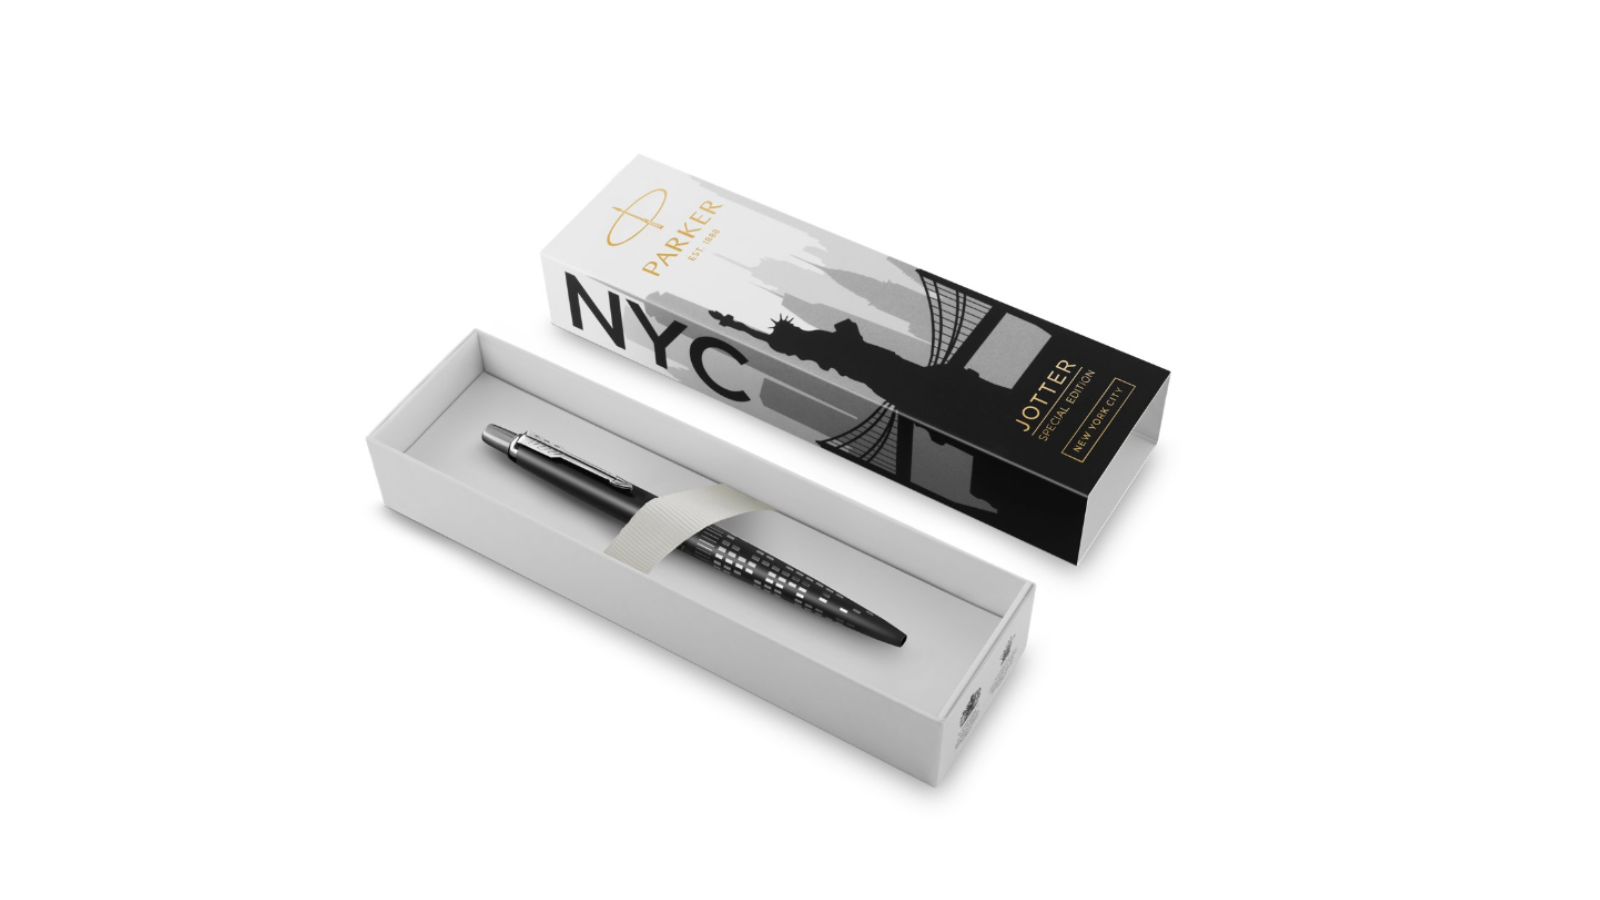 Jotter New York box by Fulker